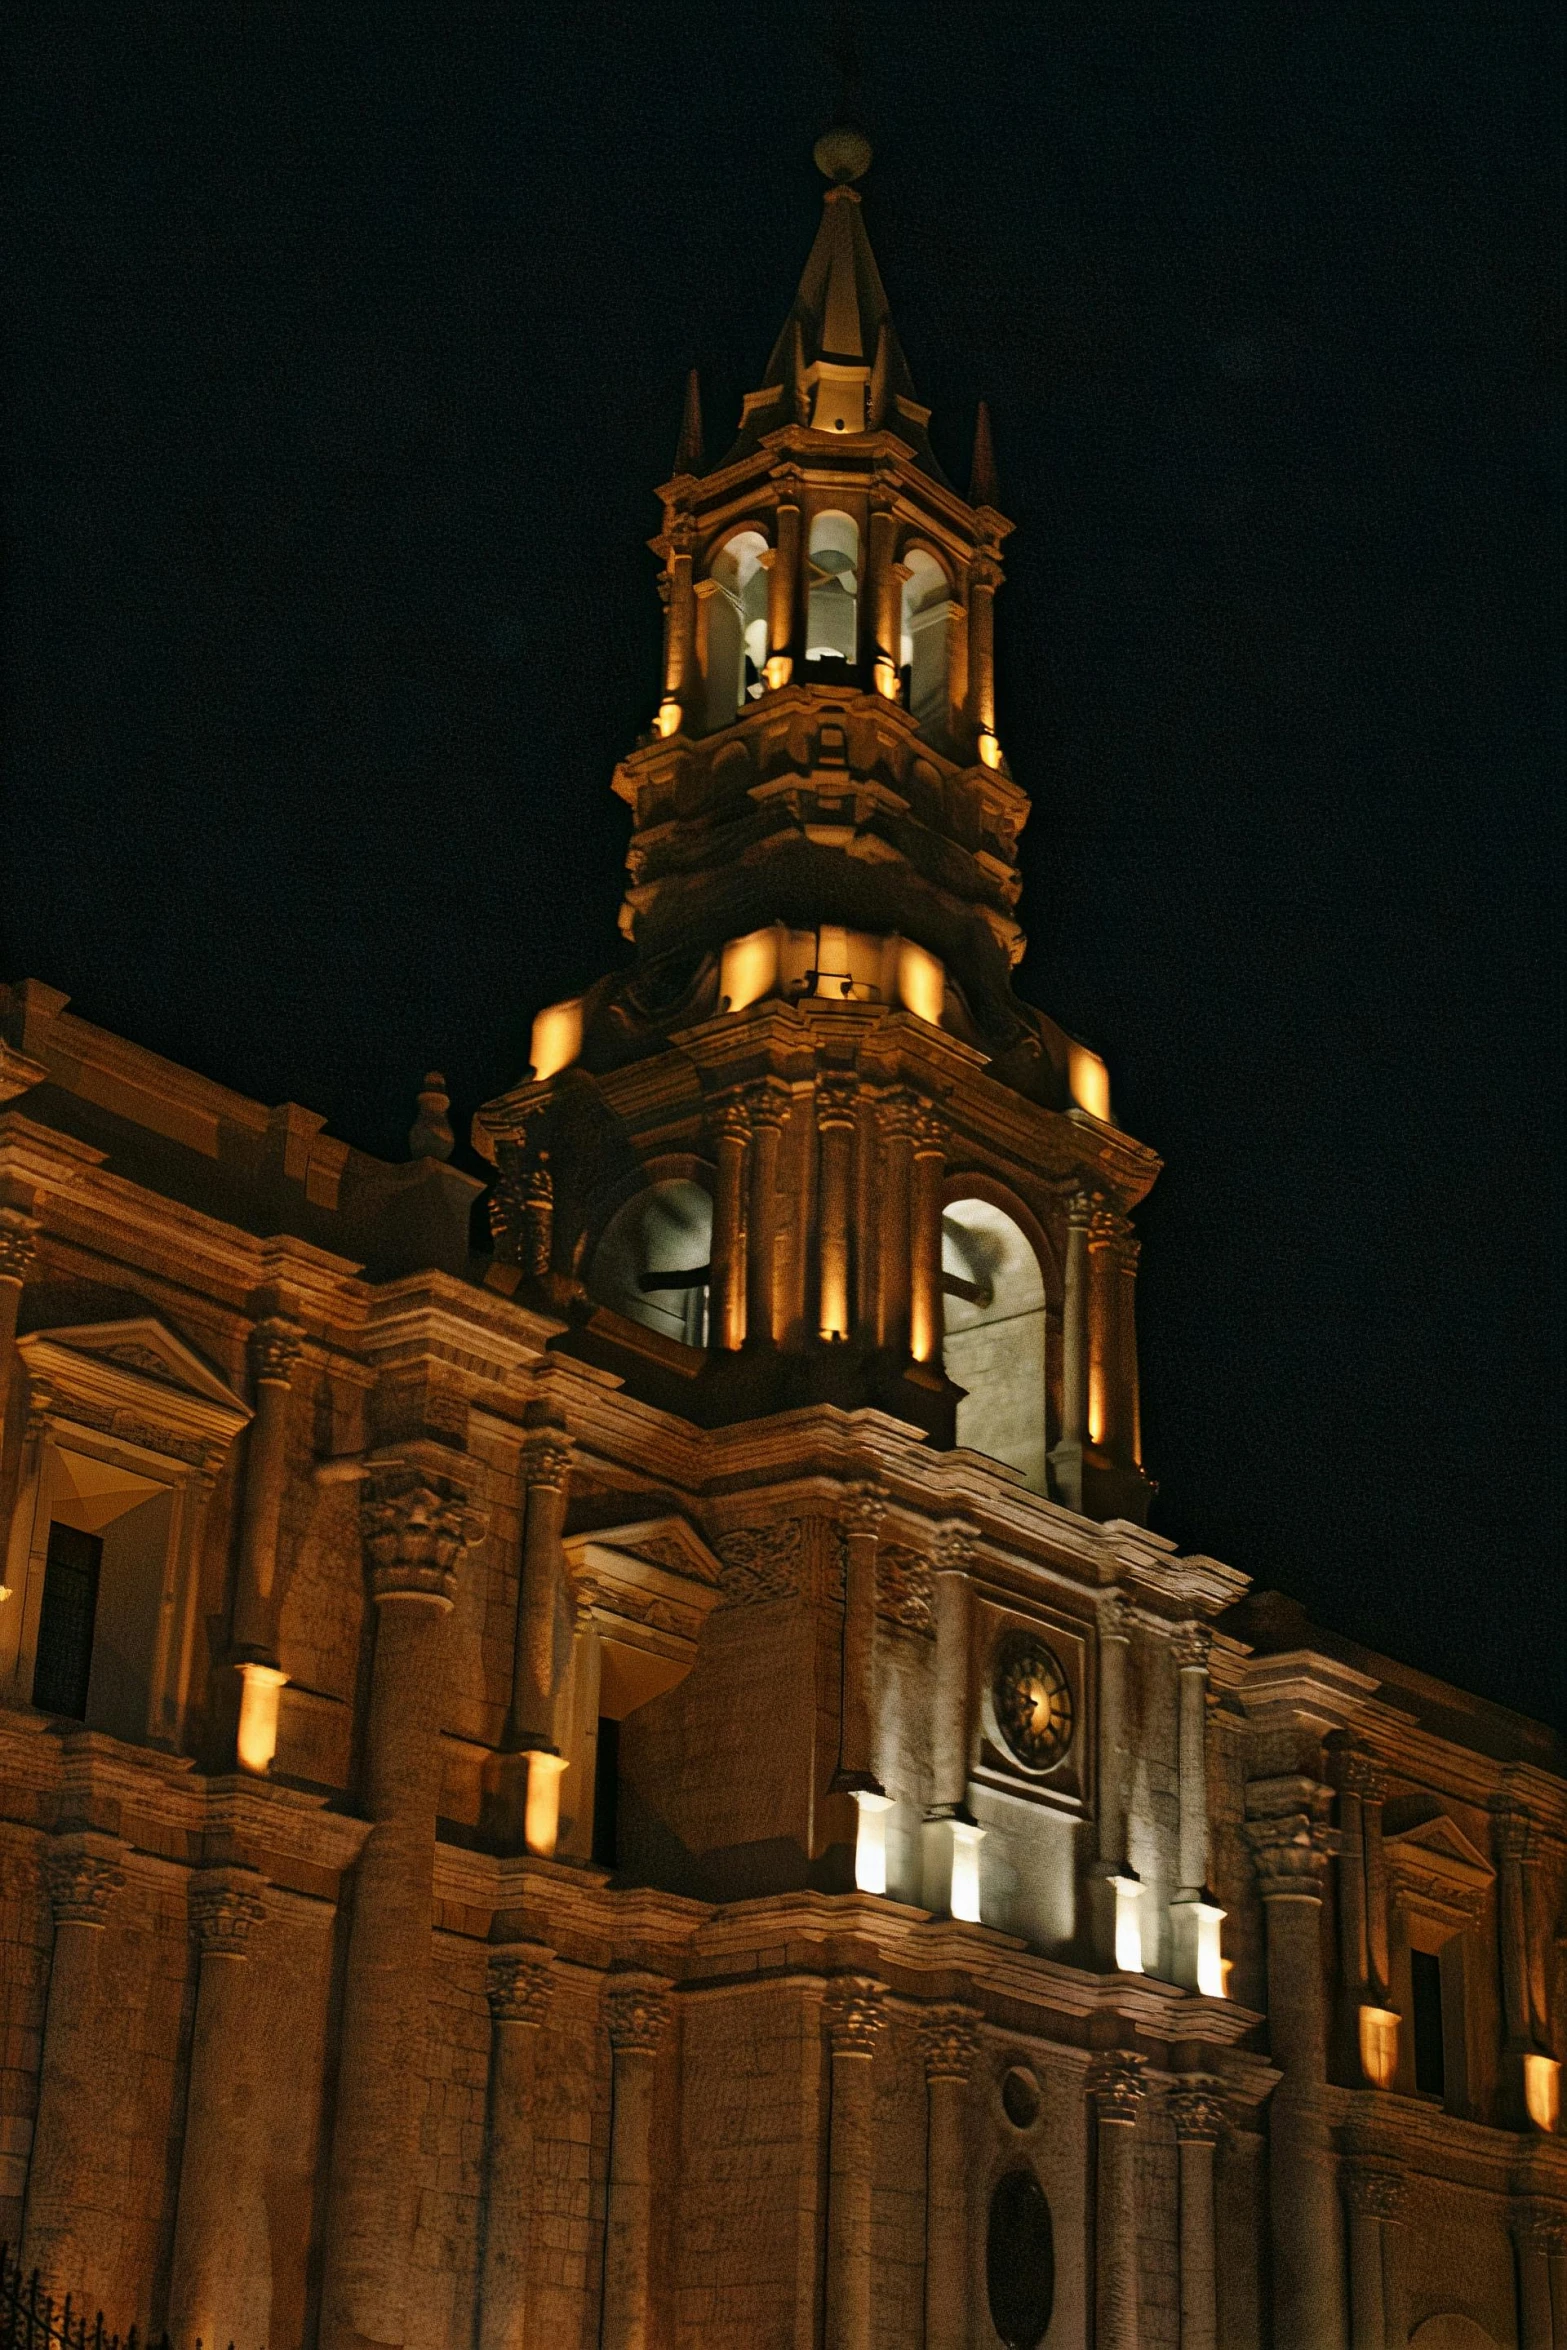 a large building with a clock tower lit up at night, inspired by Francisco Zúñiga, baroque architecture, neo - andean architecture, dramatic lighting - n 9, spire